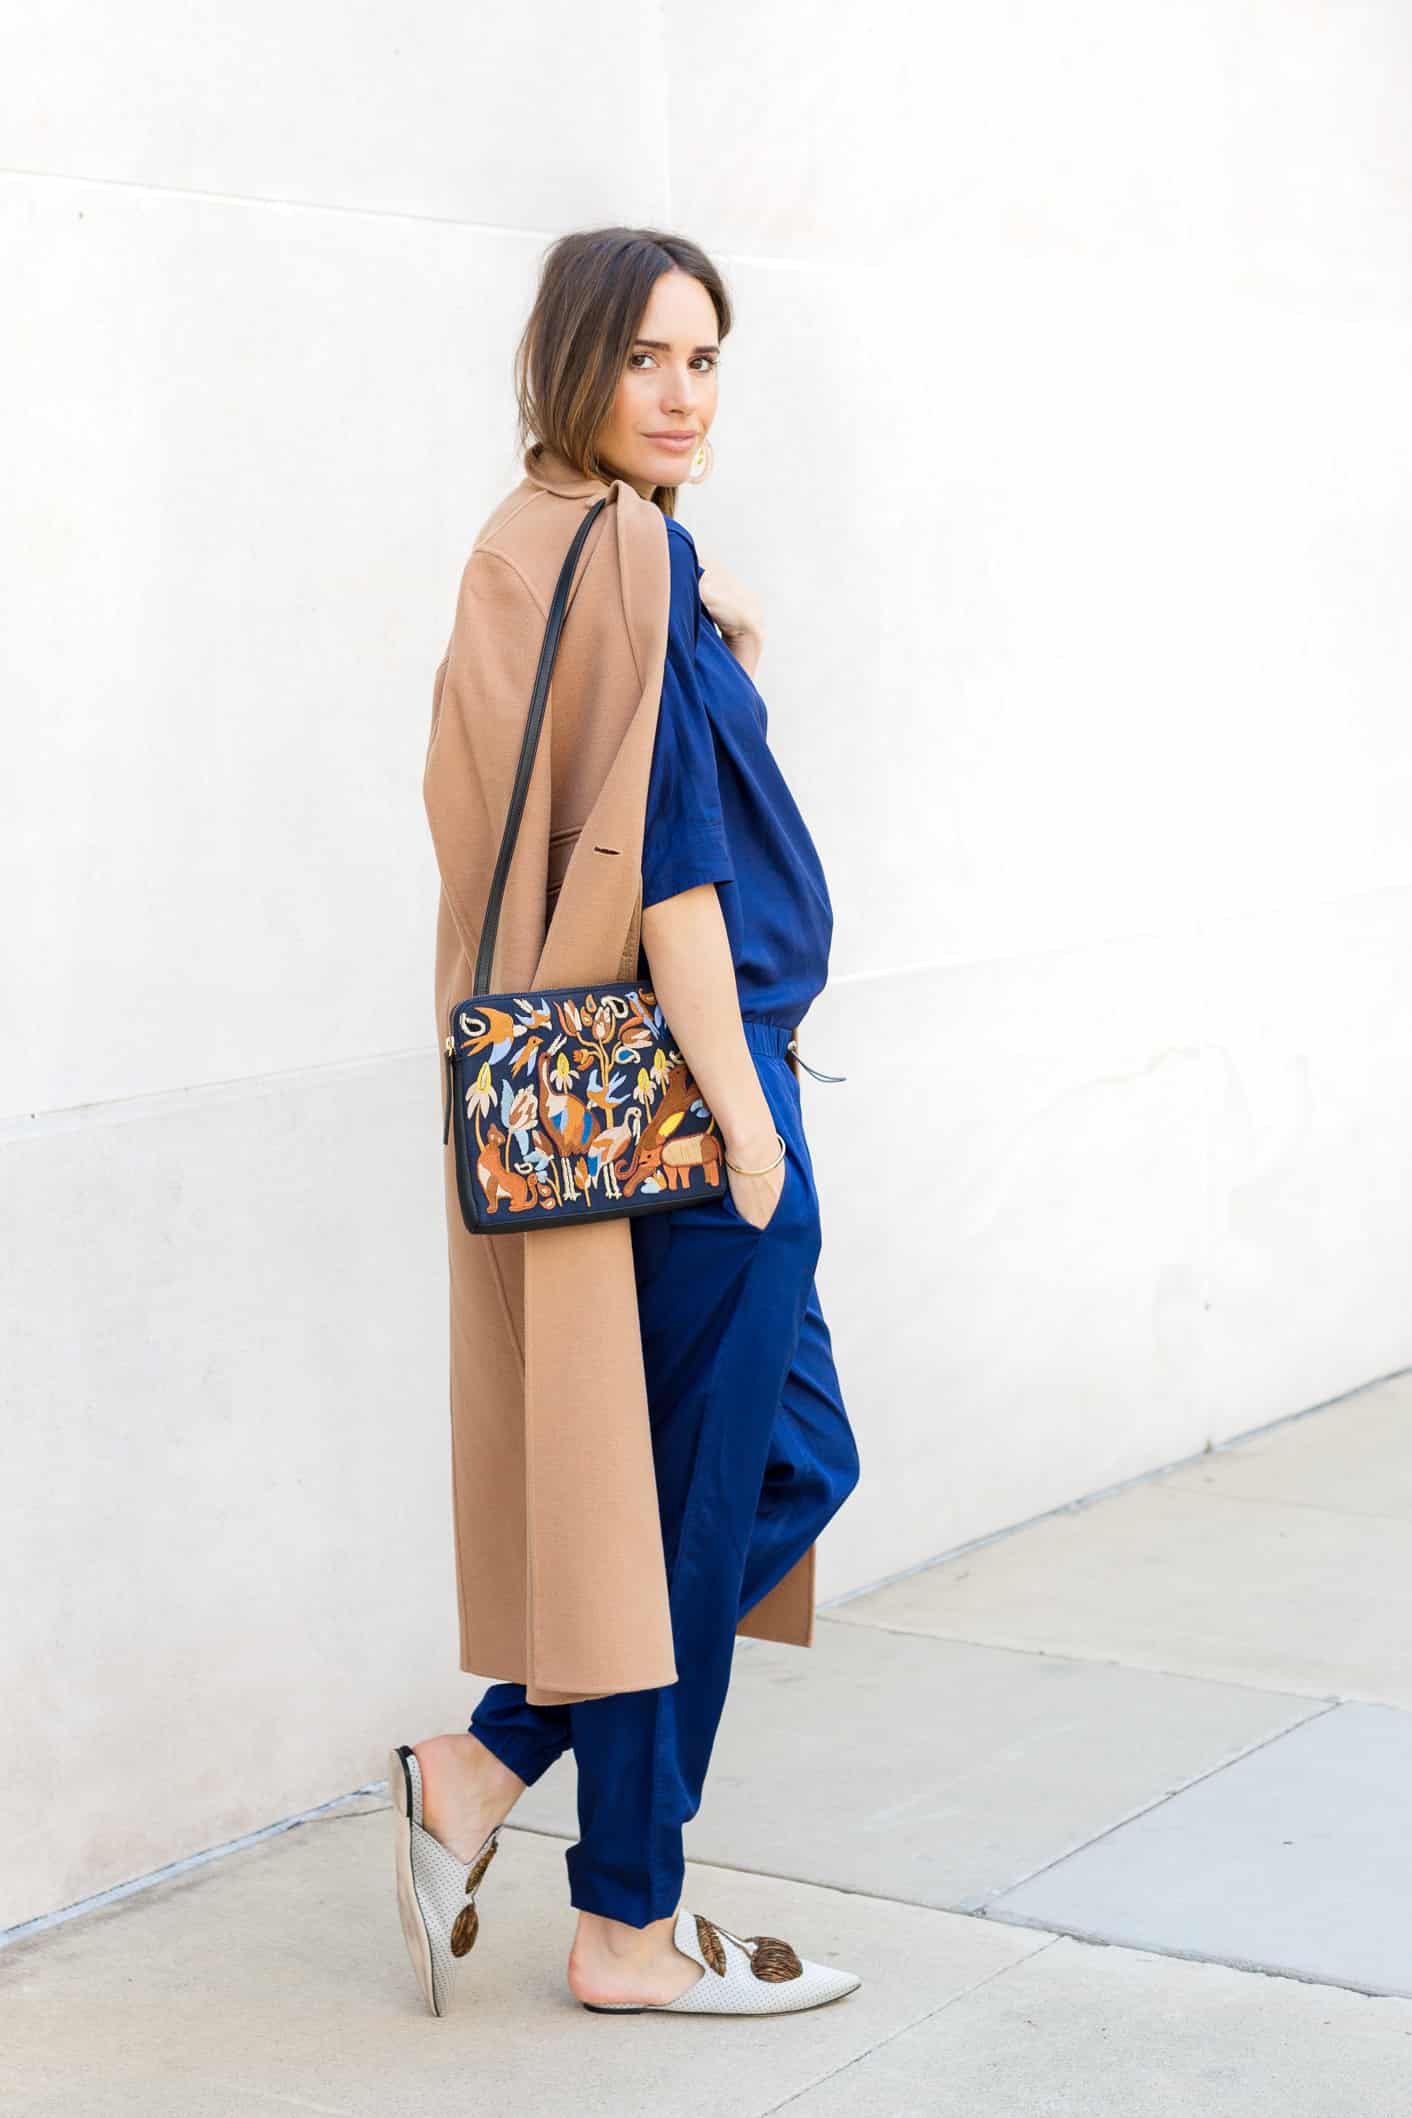 Louise Roe wearing a camel coat and blue pantsuit for fall